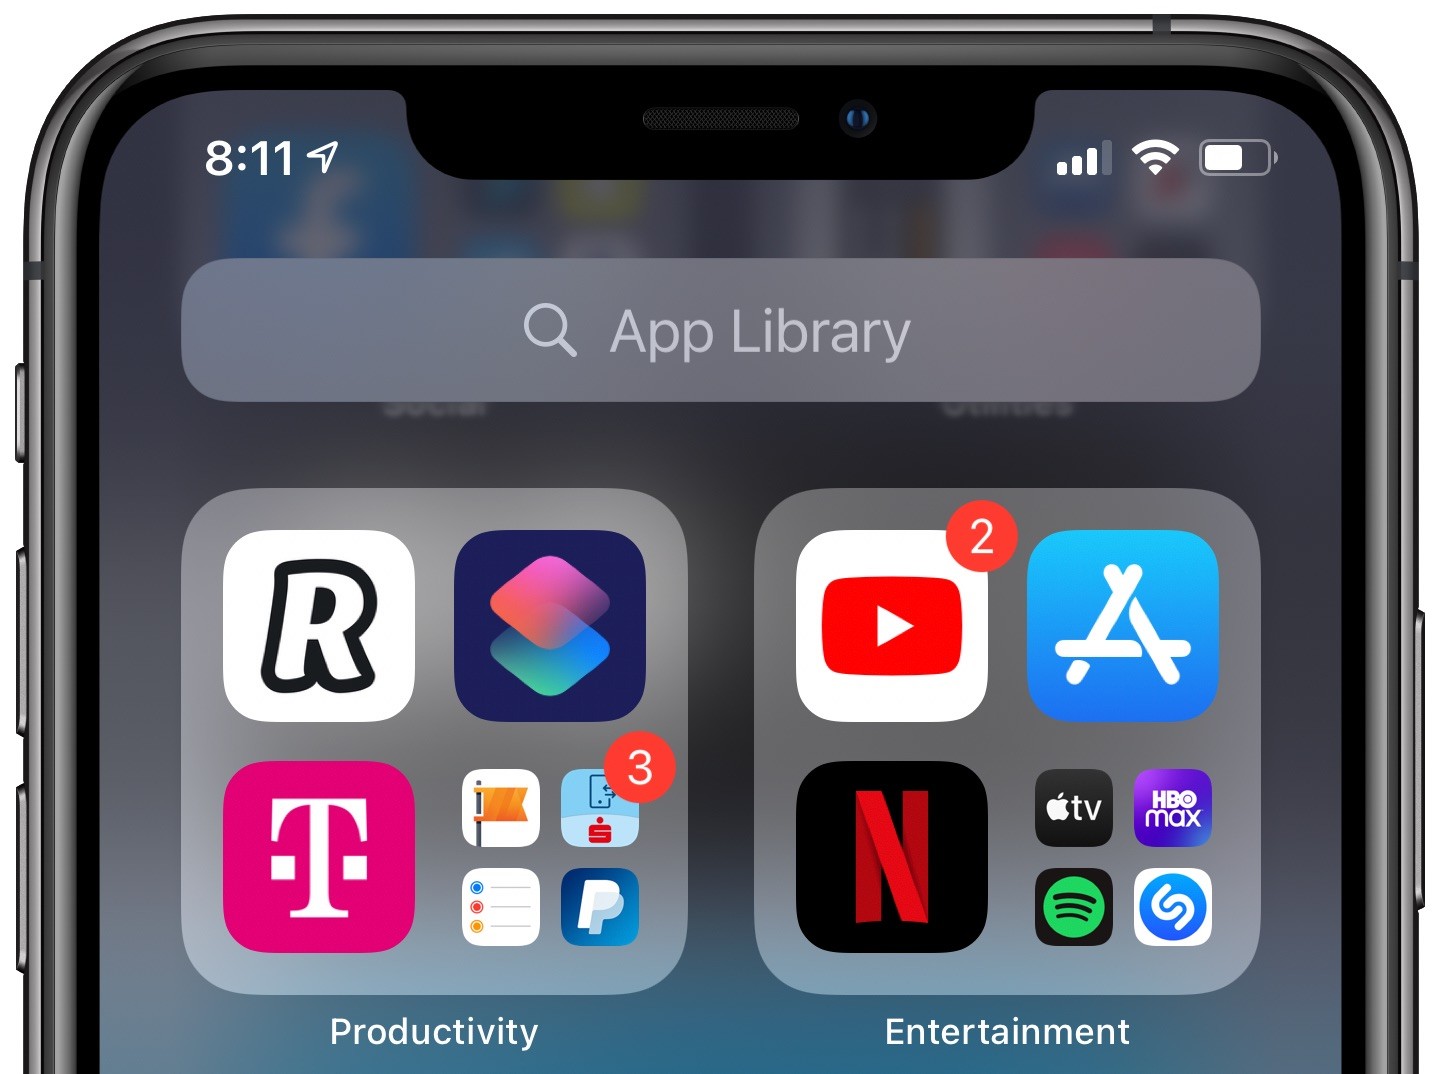 How To Move Apps From The App Library To The Home Screen On Your IPhone